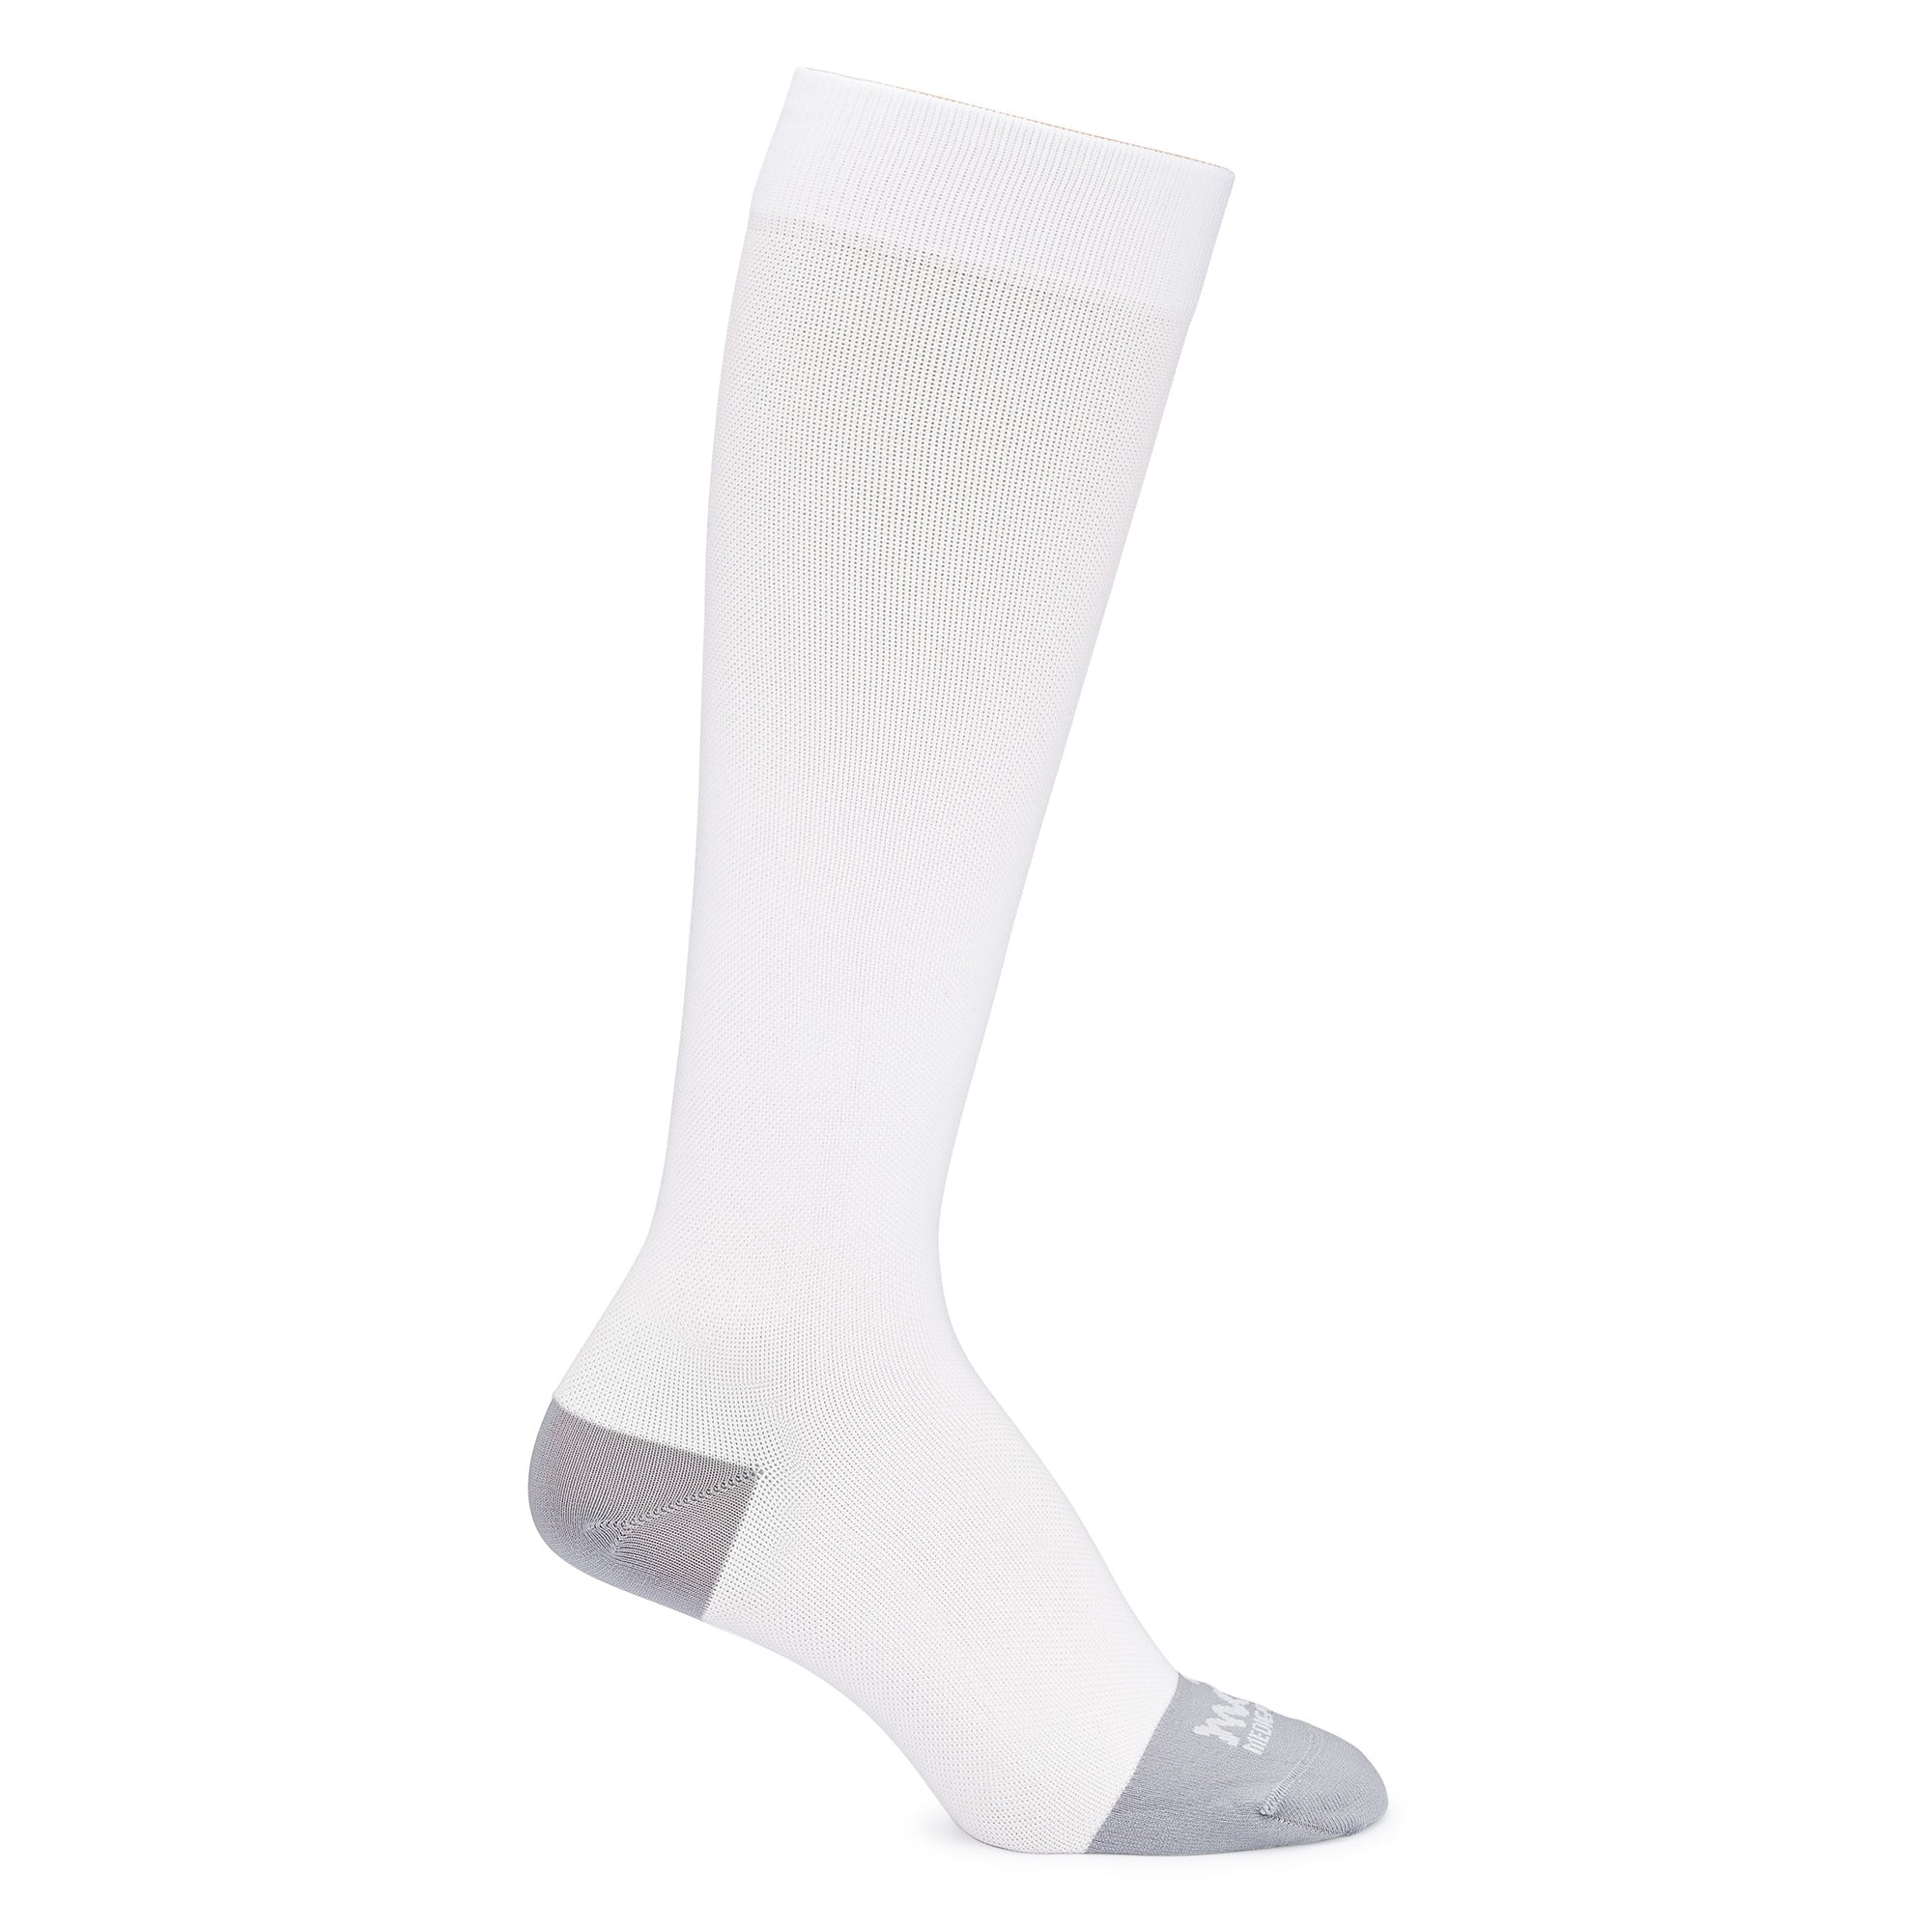 White tall sock with grey toe and heel caps-Motif Medical Gradient Maternity Compression Socks